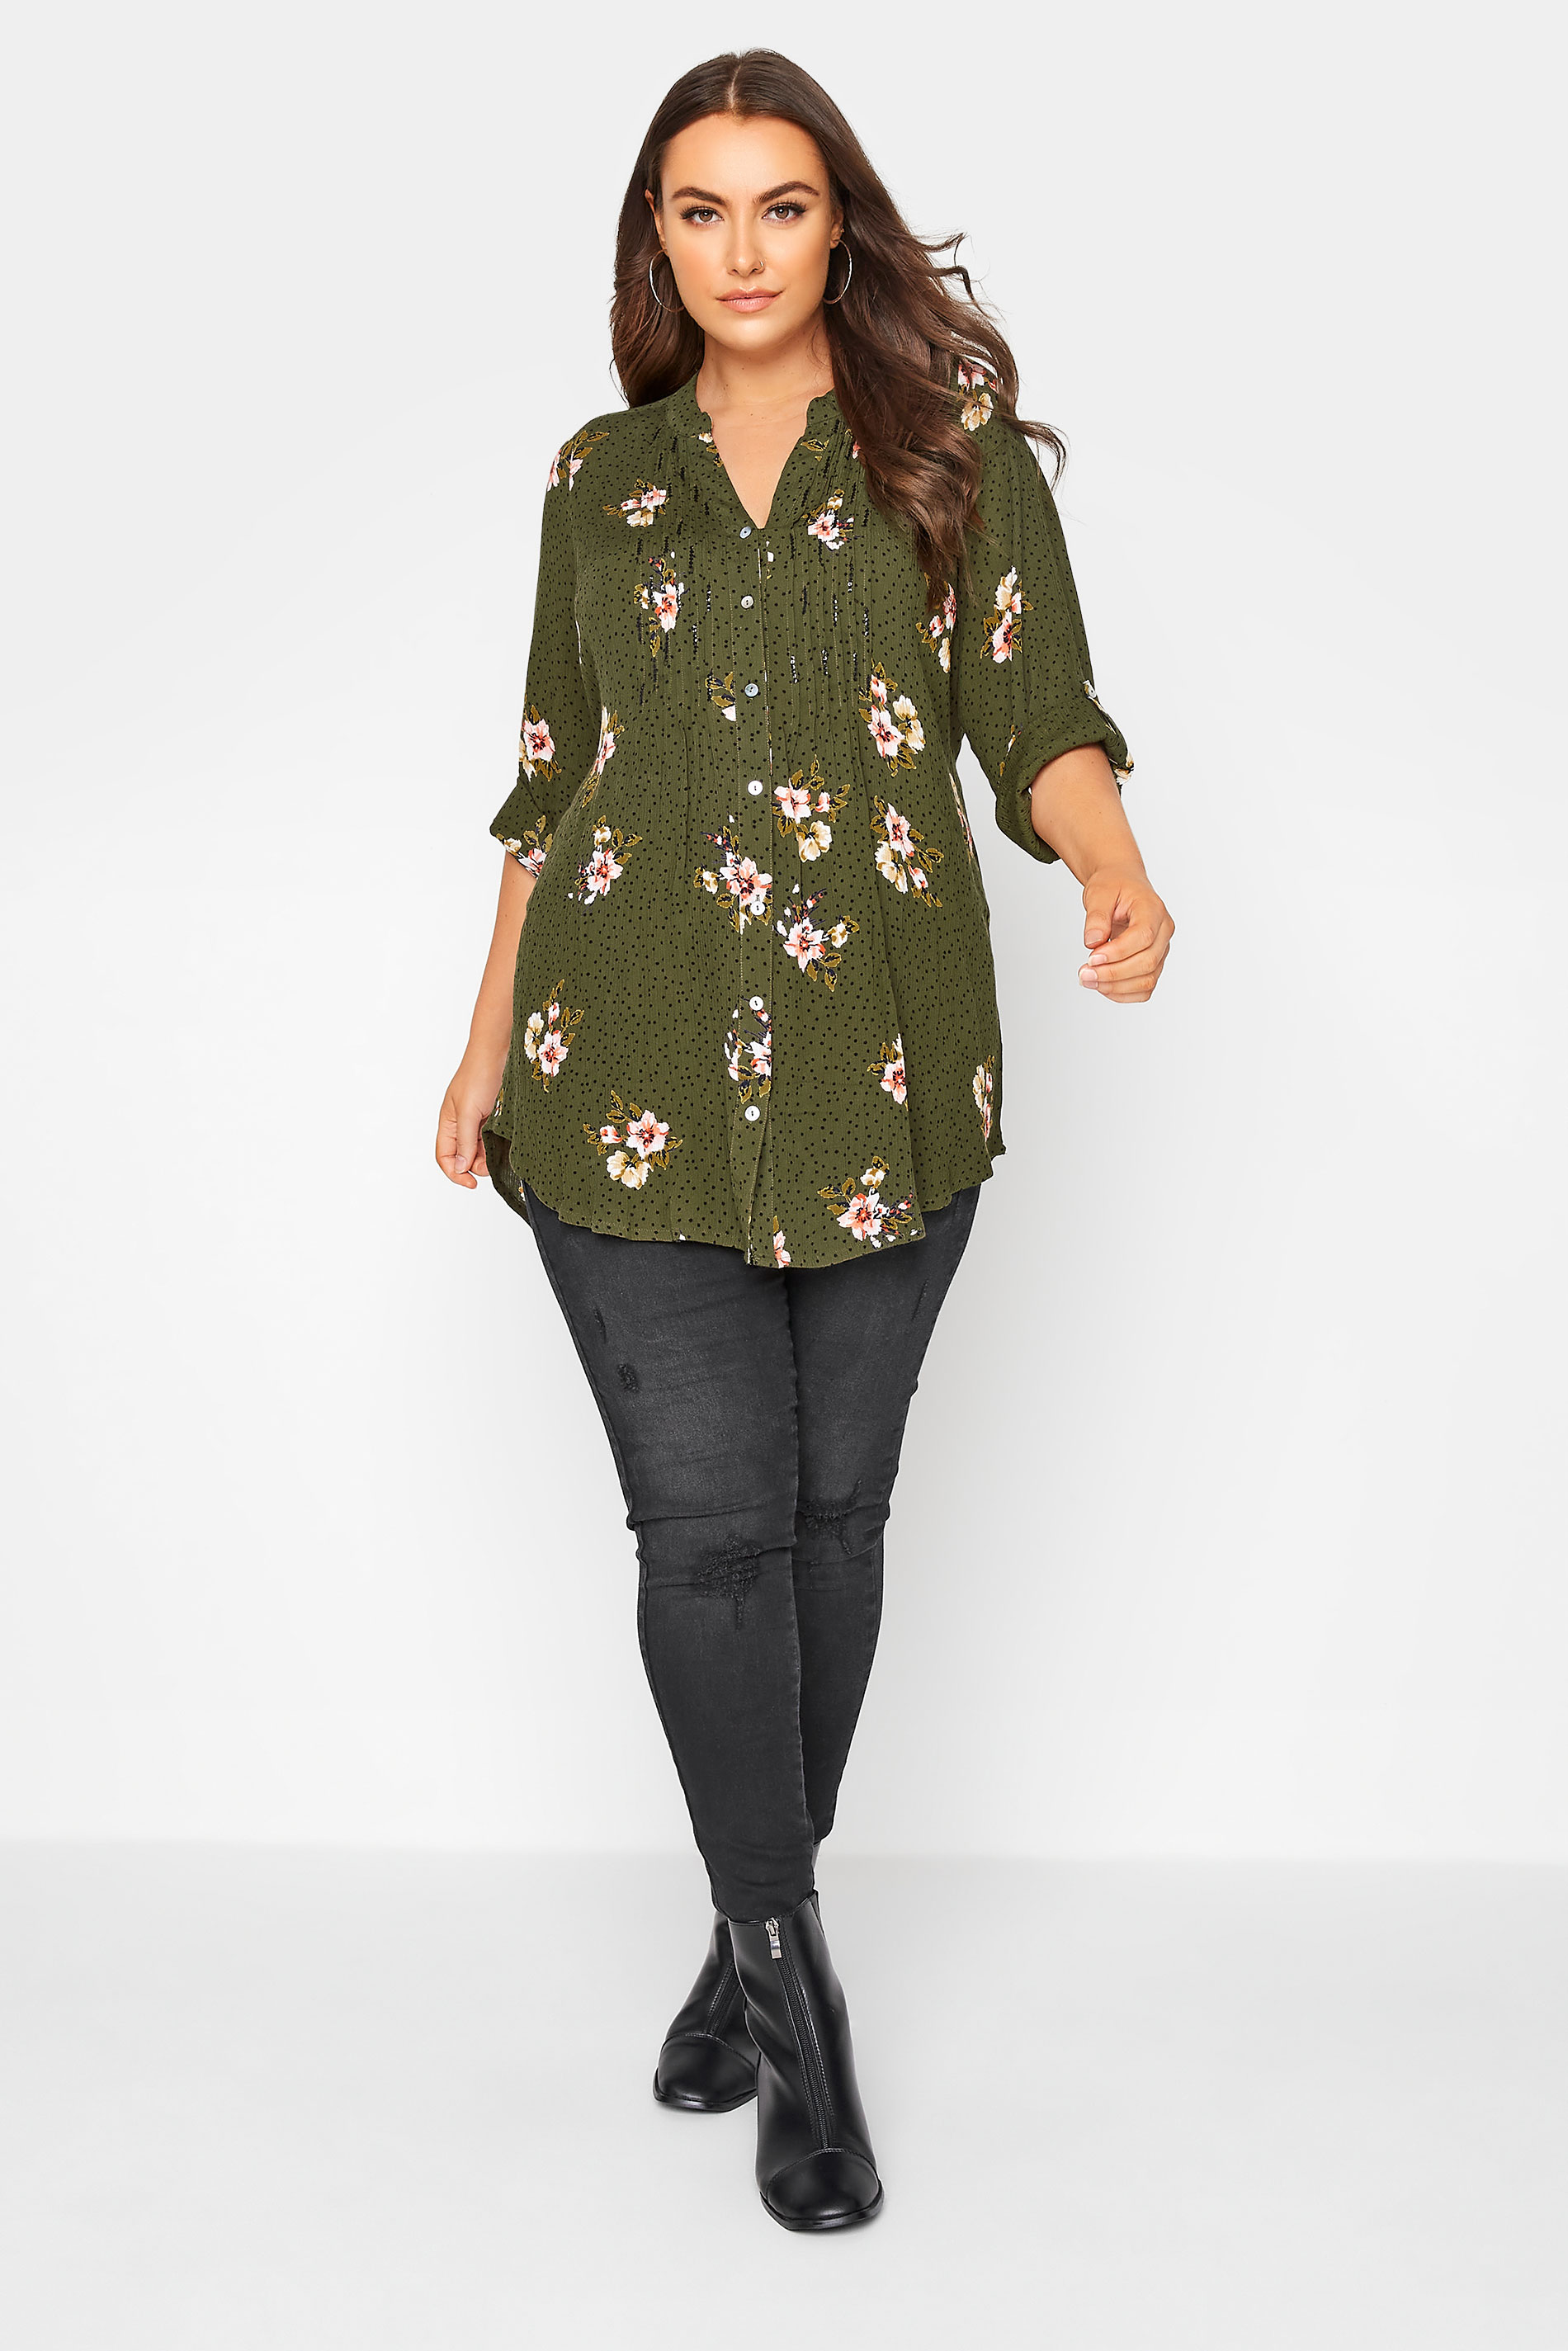 Plus Size Khaki Green Floral Pinktuck Blouse | Yours Clothing 2